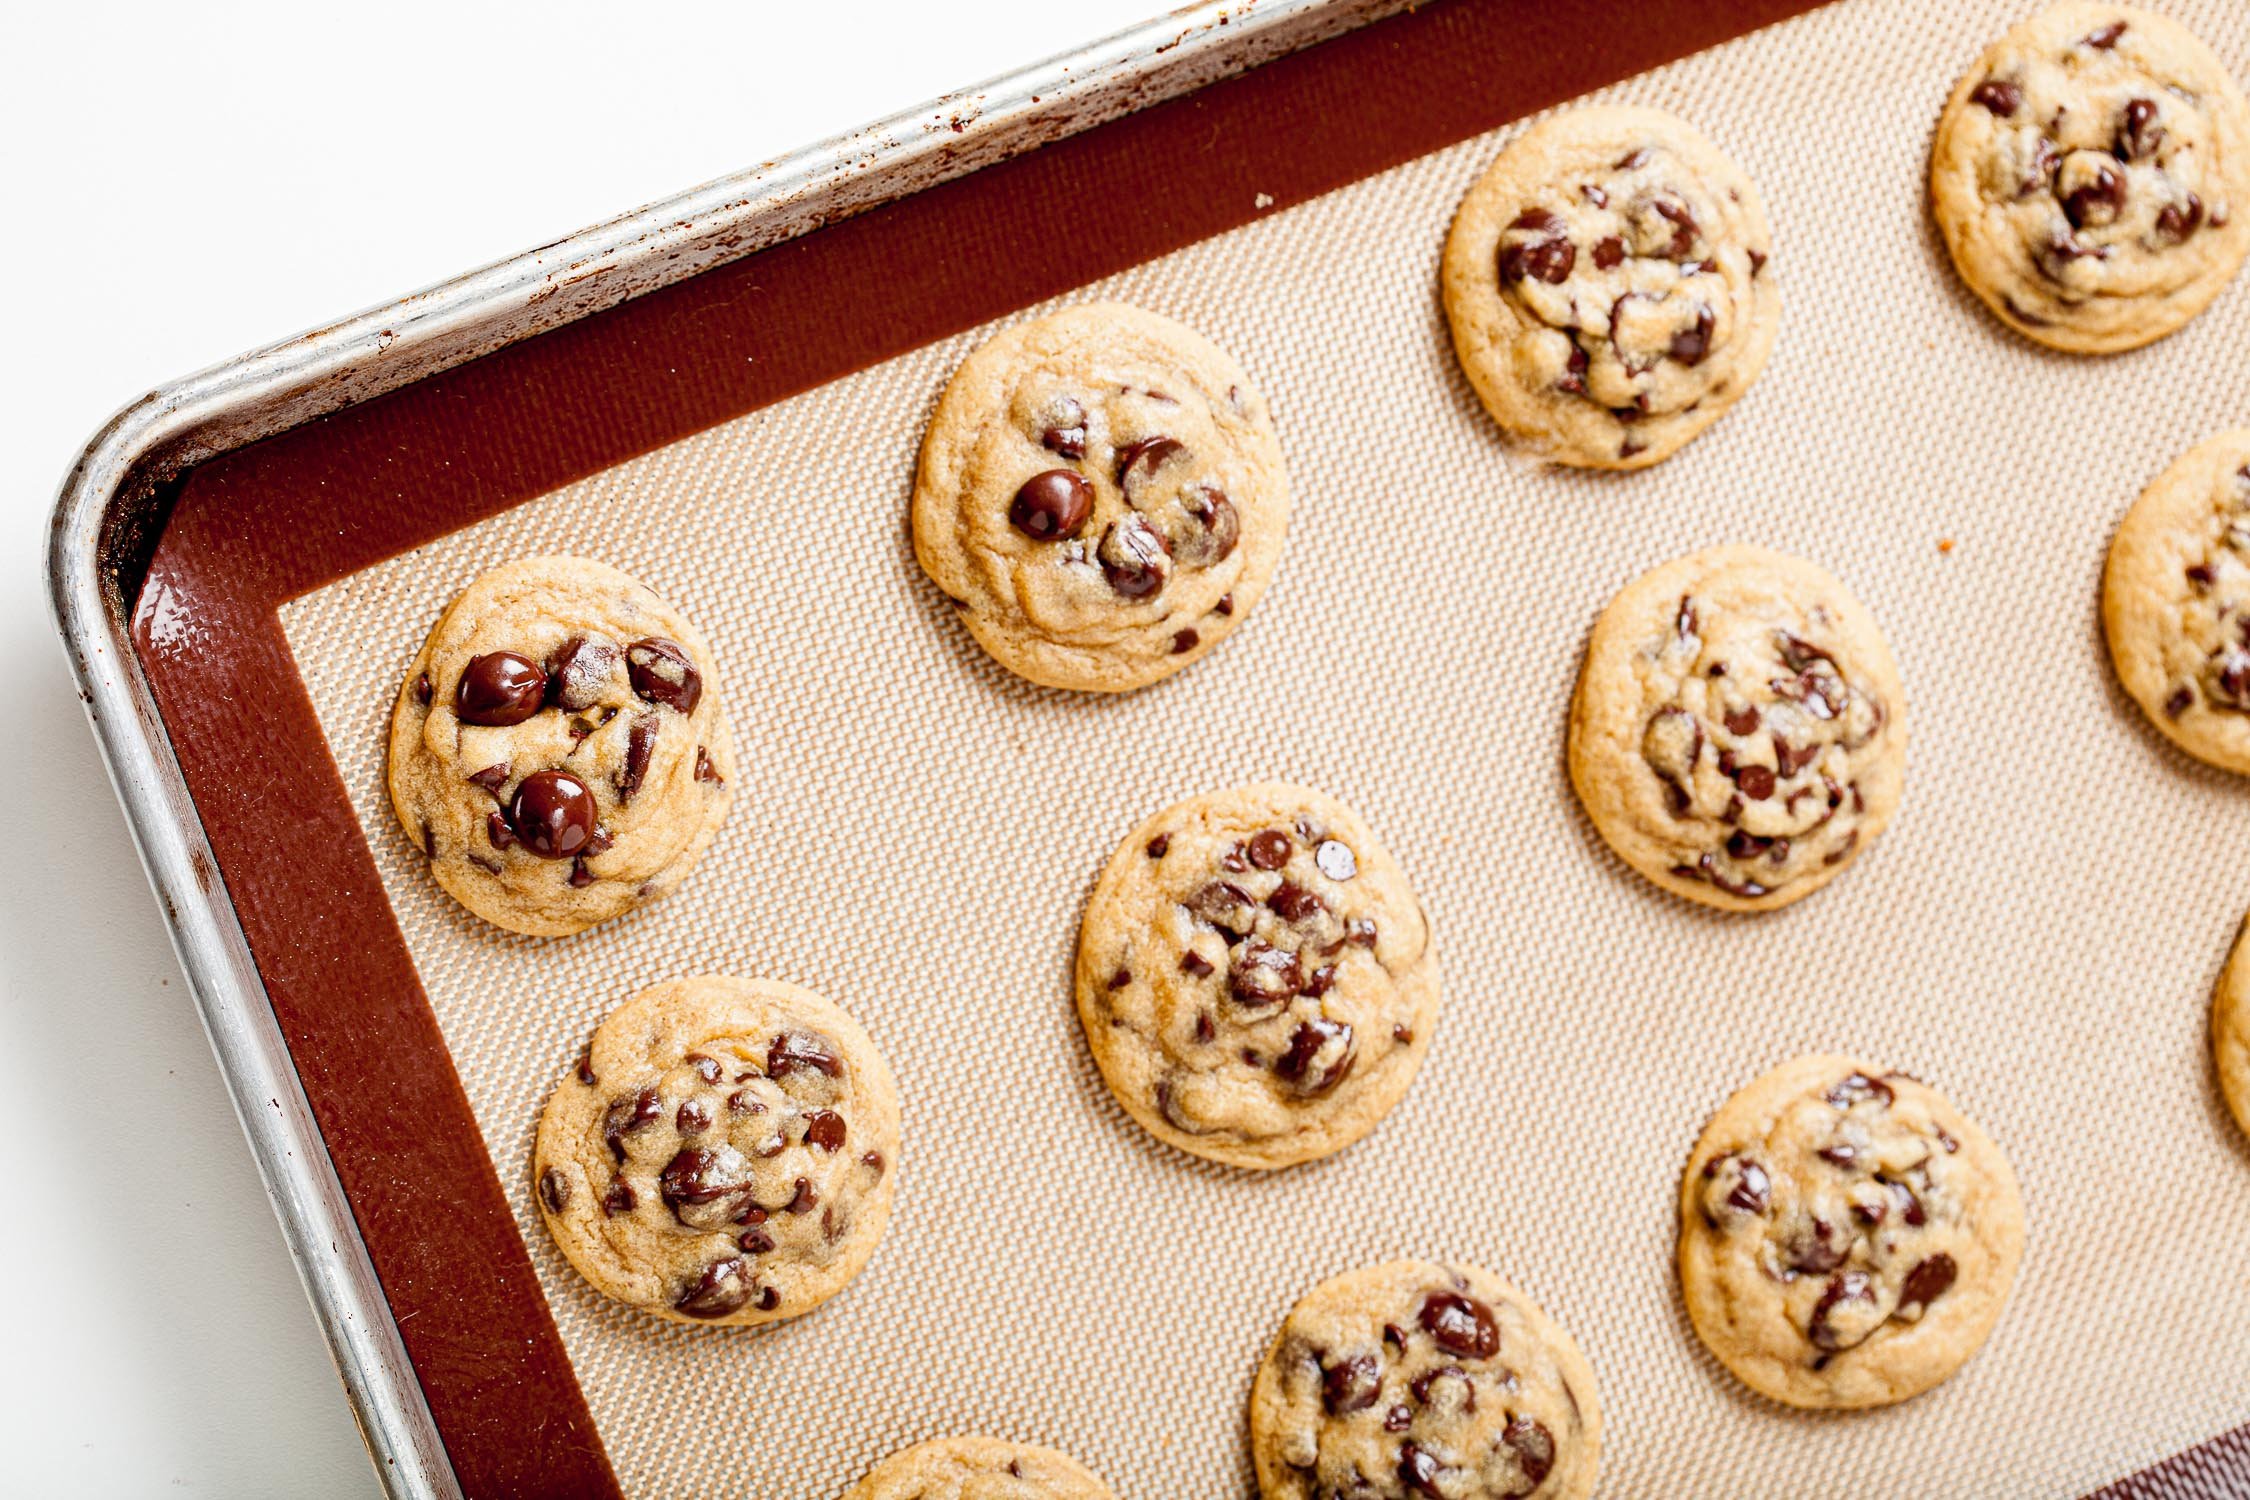 Bakery Style Chocolate Chip Cookies on Baking Sheet